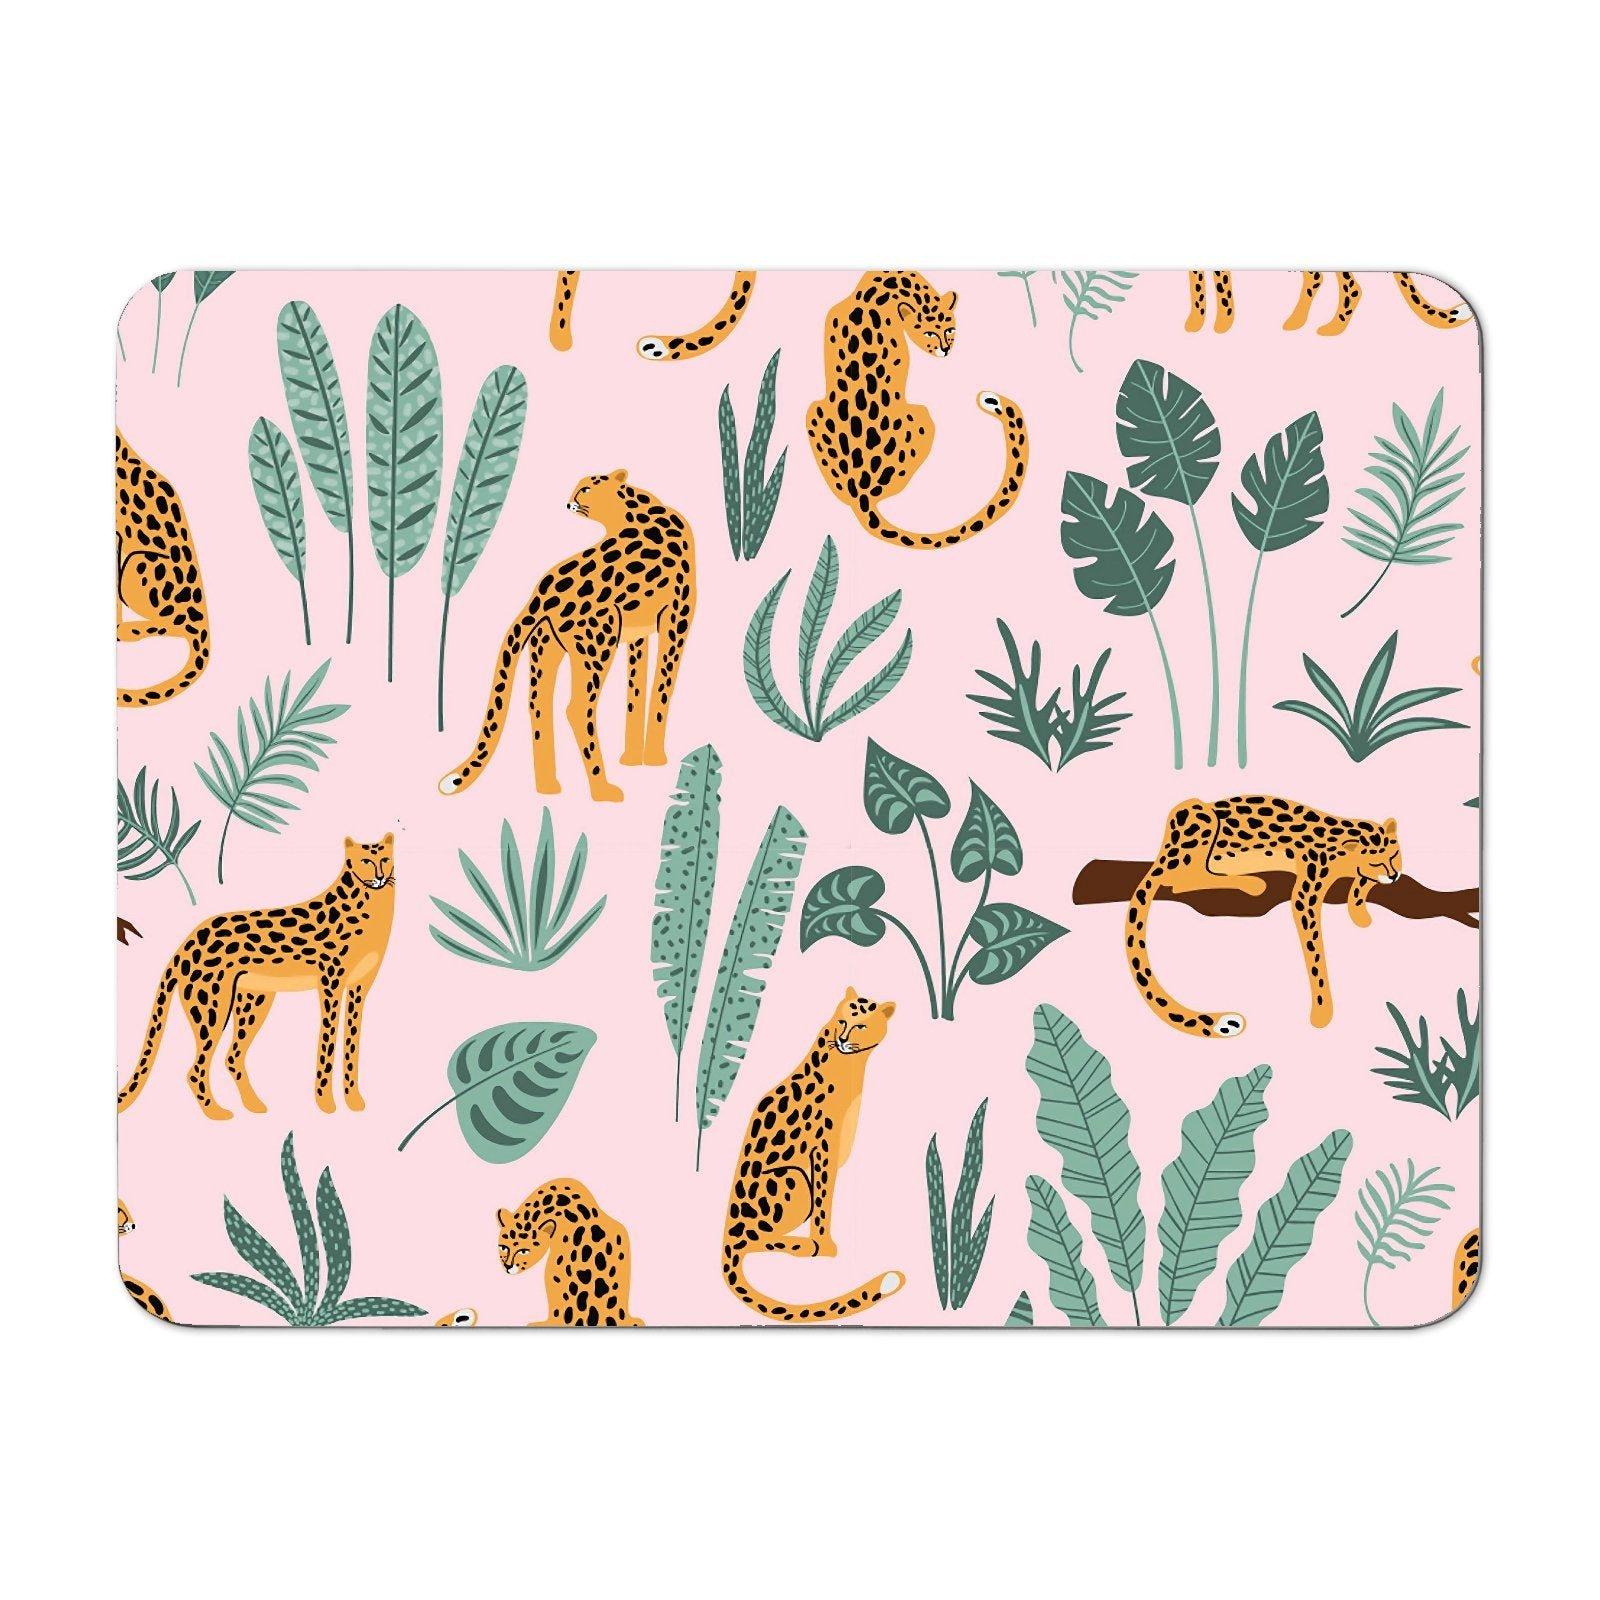 Hand Drawn Leopards Placemats